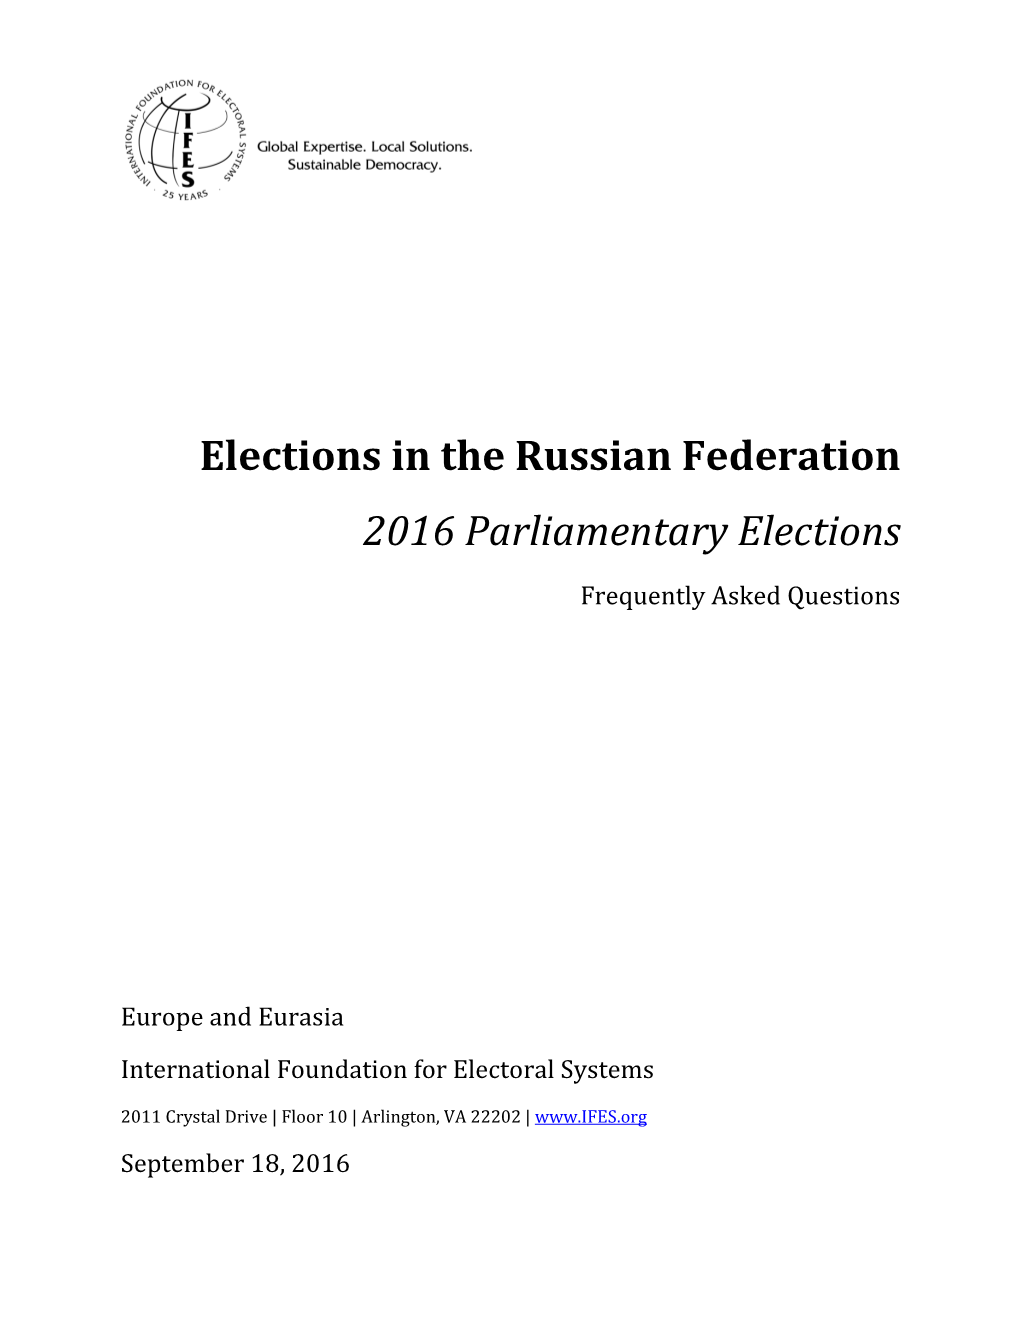 Elections in the Russian Federation: 2016 Parliamentary Elections Frequently Asked Questions